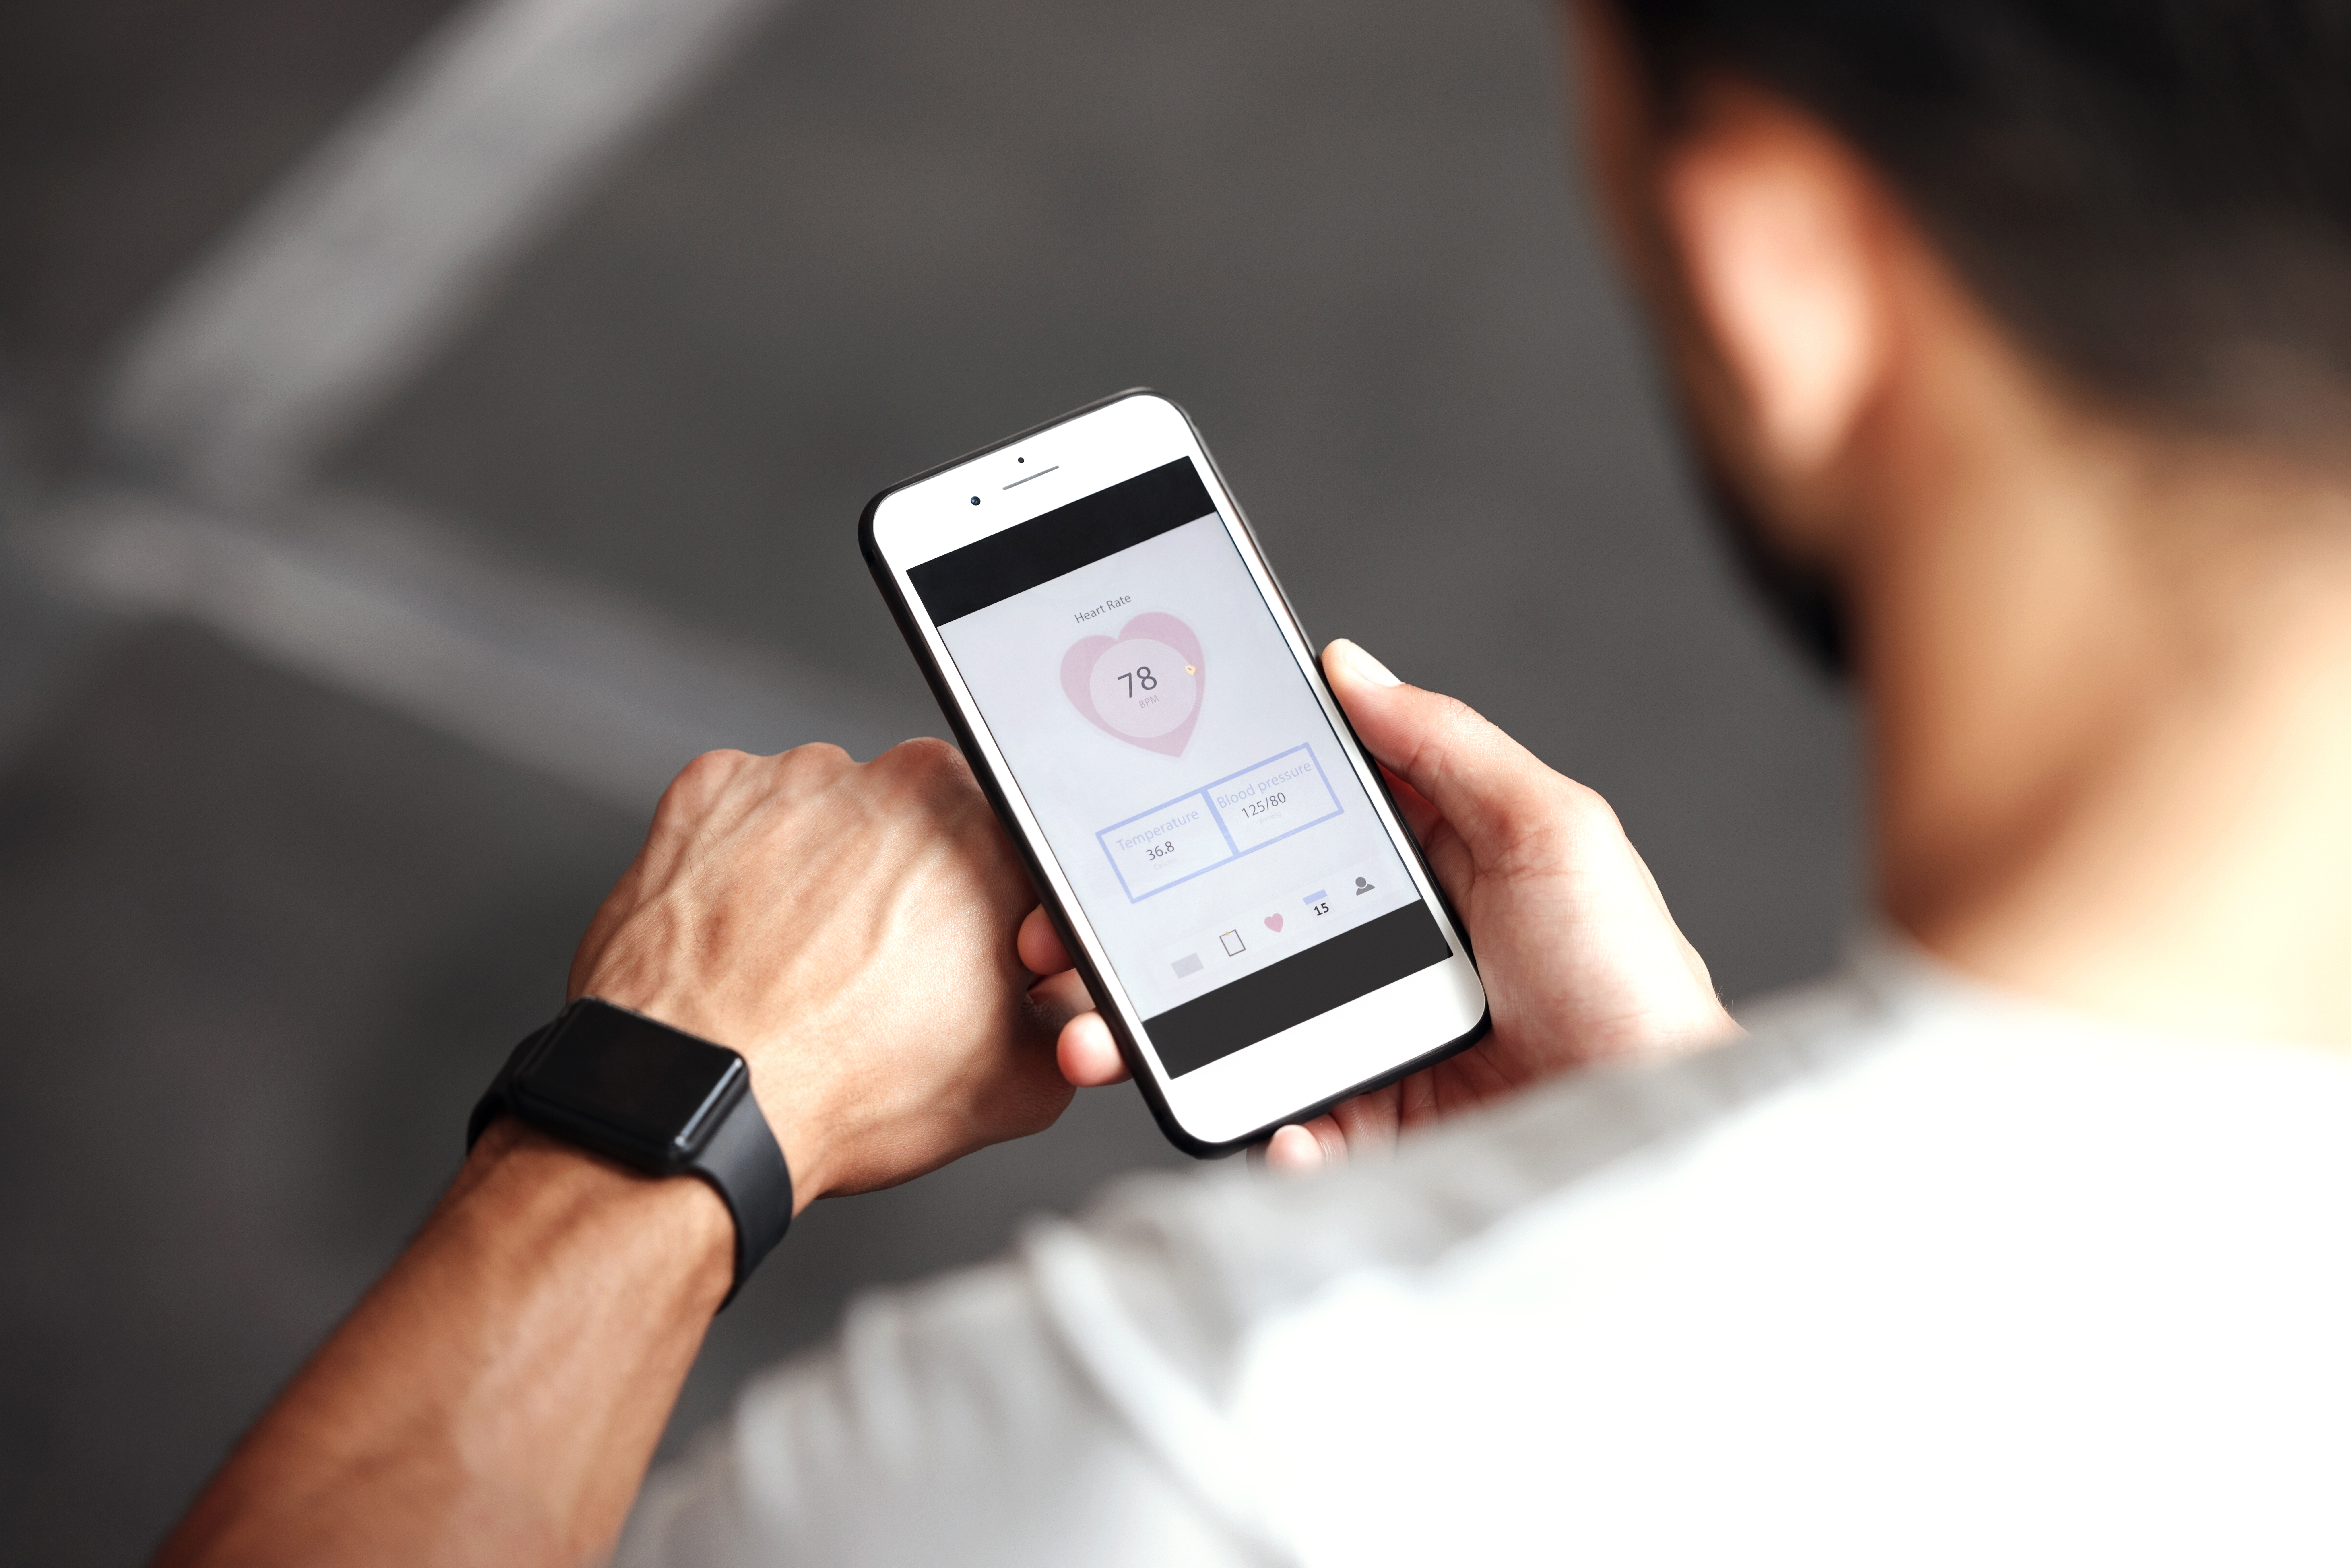 The fitness app tracks your location via GPS and it will visible to those that follow you